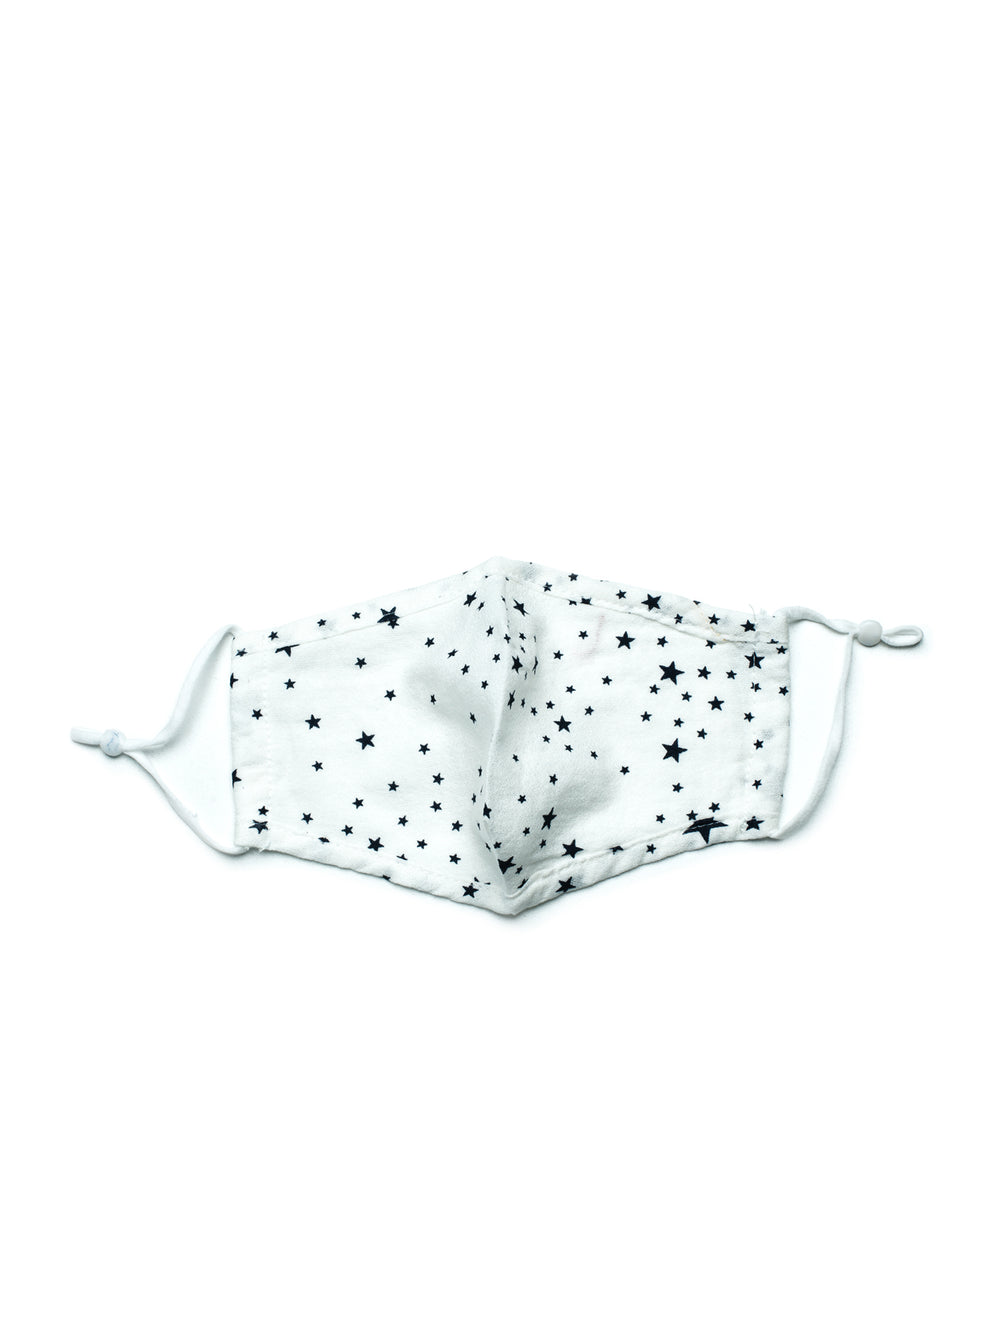 KW FASHION CORP MIDNIGHT STAR MASK - WHITE - CLEARANCE